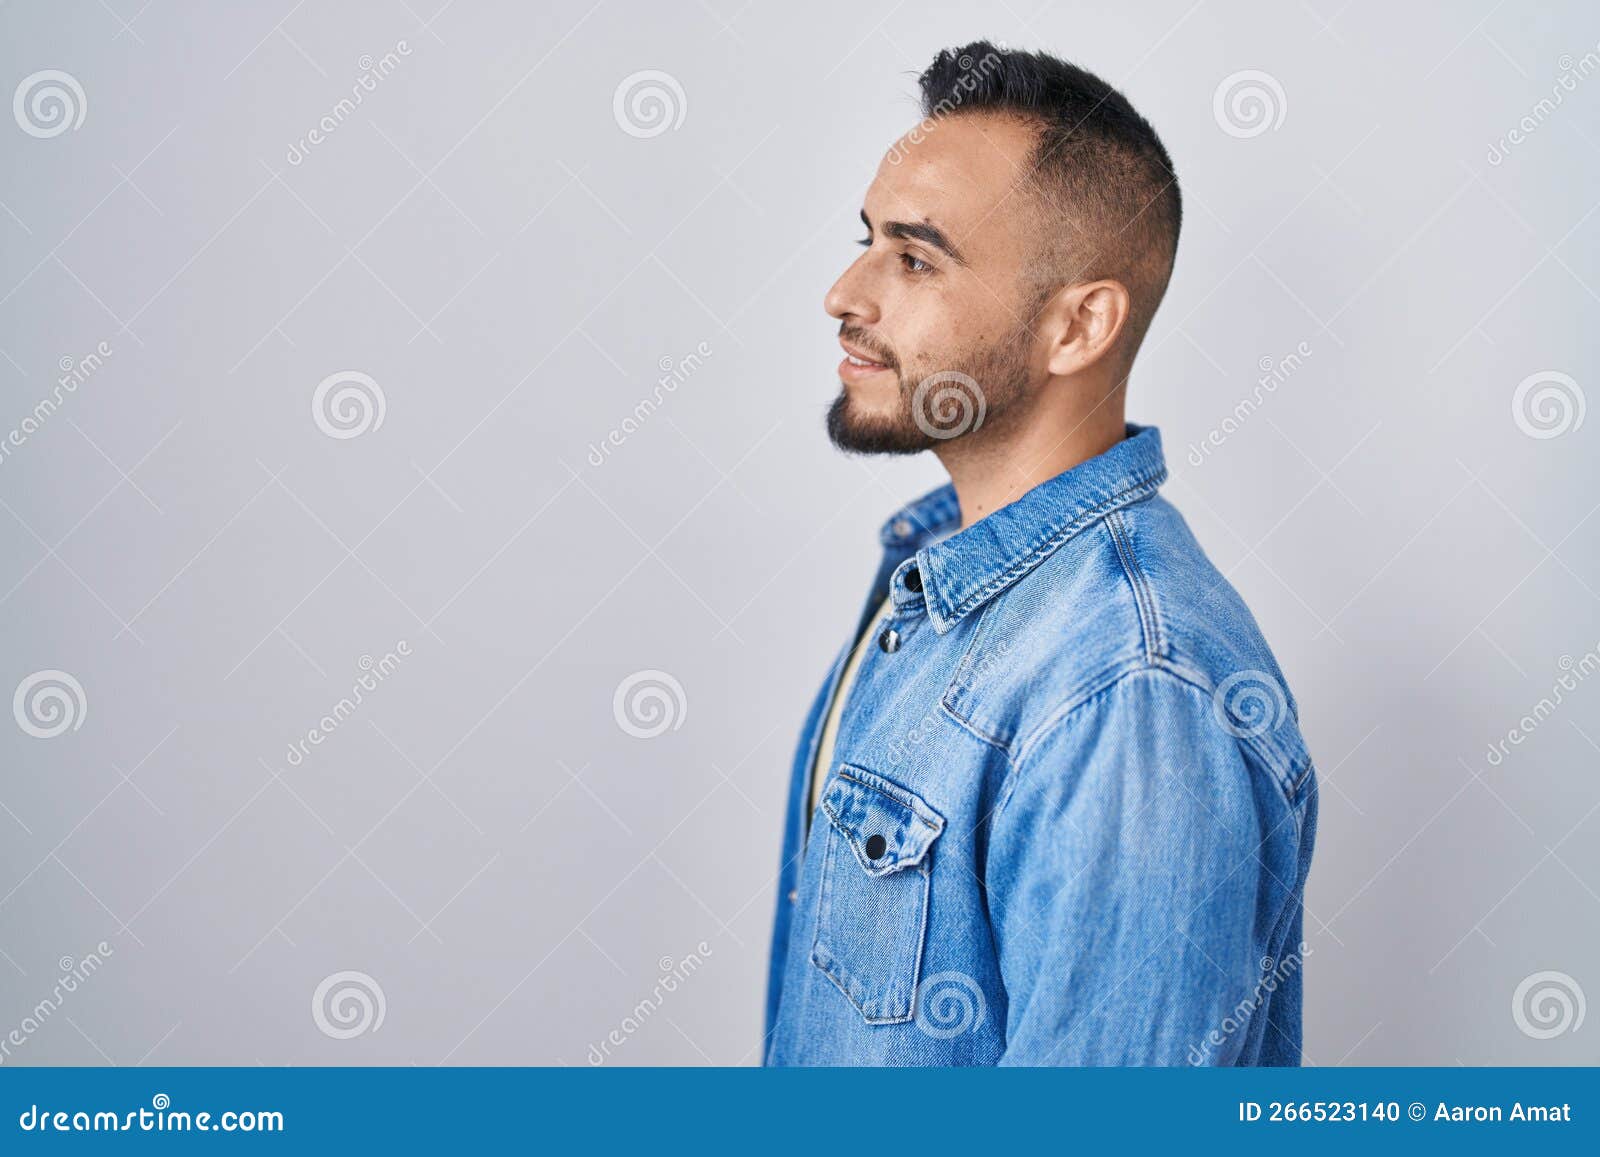 Side Pose Of A Old Man Against White Background Stock Photo, Picture and  Royalty Free Image. Image 52917120.